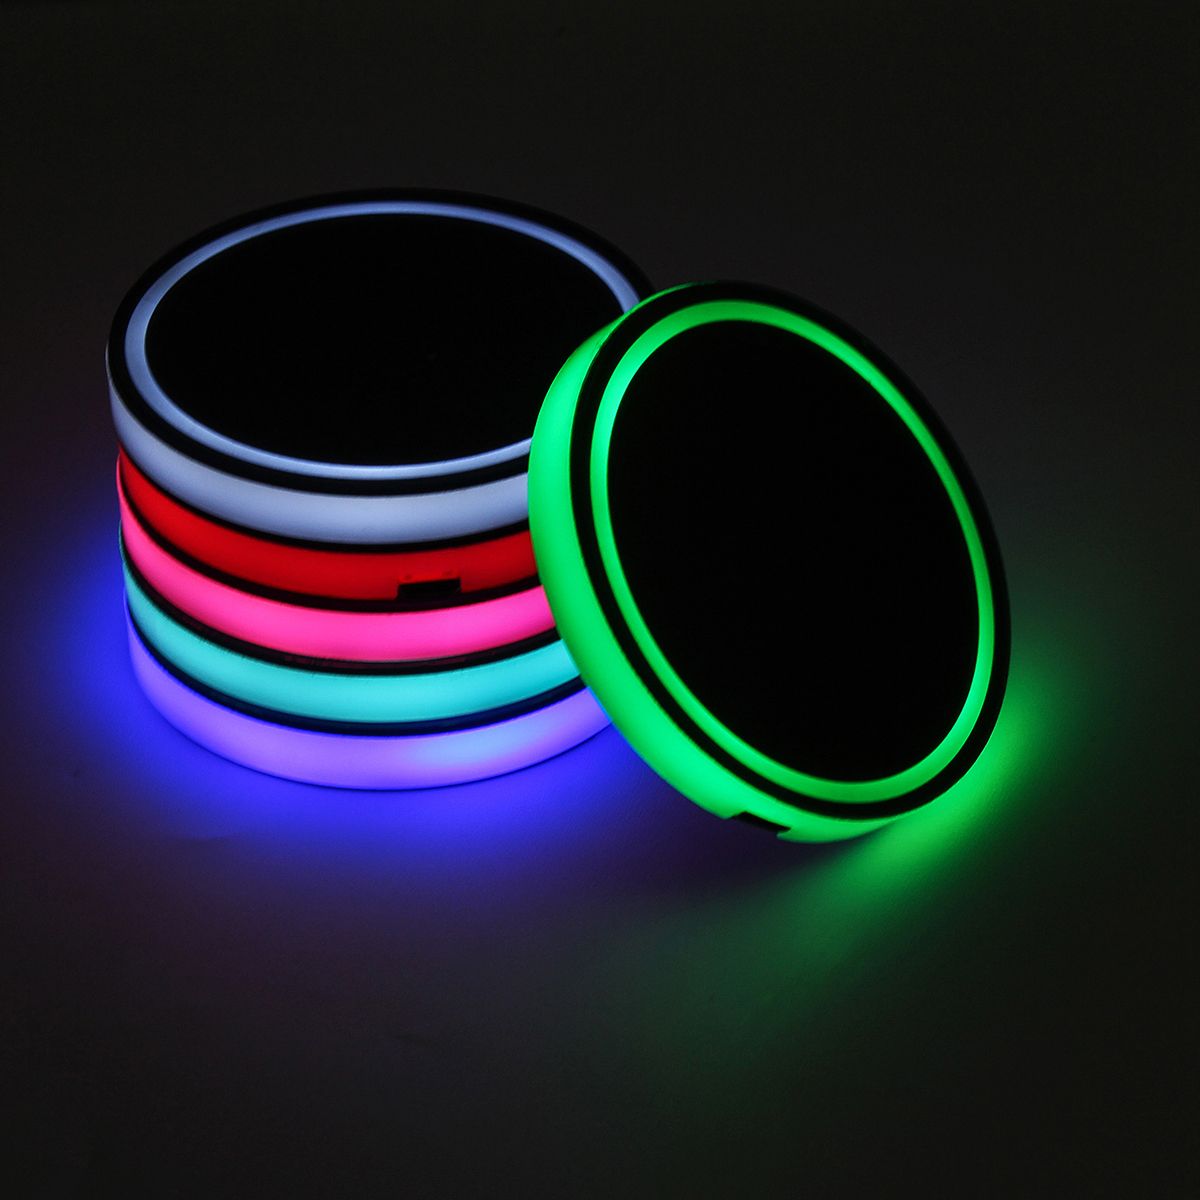 LED-Car-Cup-Holder-Pad-Mat-Auto-Atmosphere-Interior-Lights-USB-Rechargeable-1614260